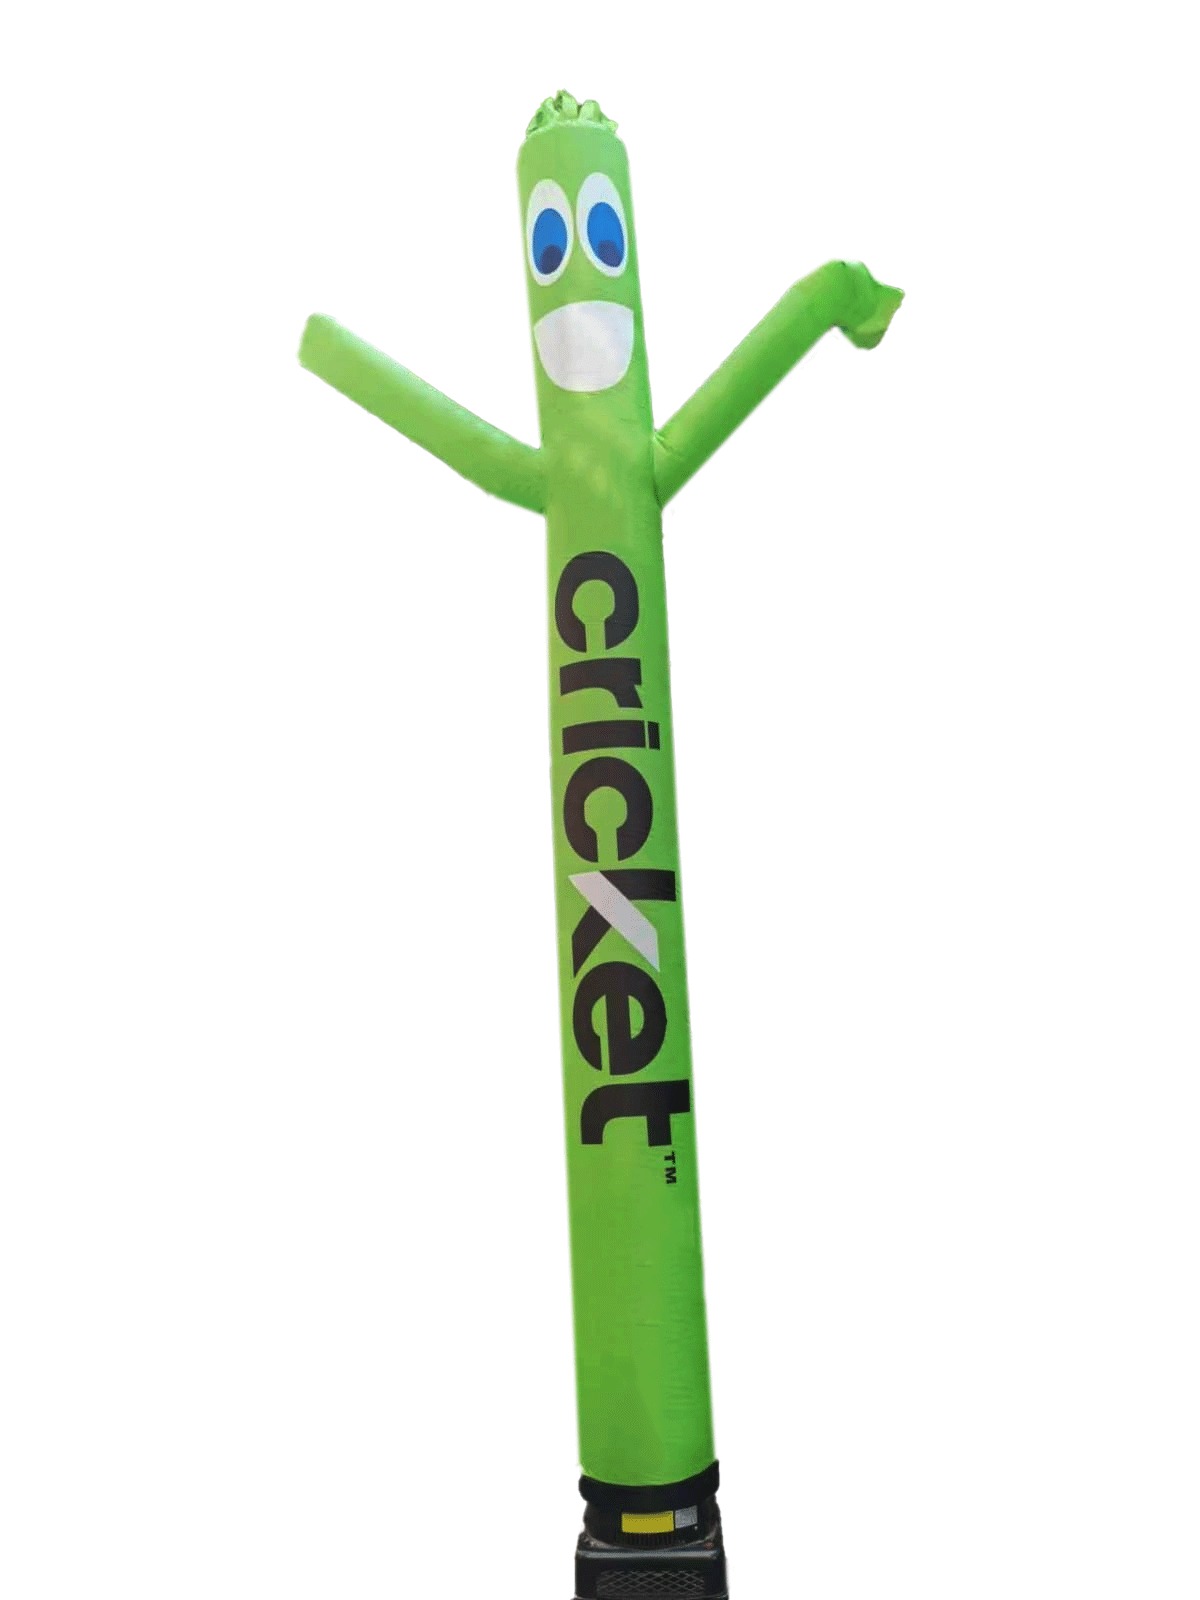 20 ft Cricket Dancing Inflatable Balloon with double side printed